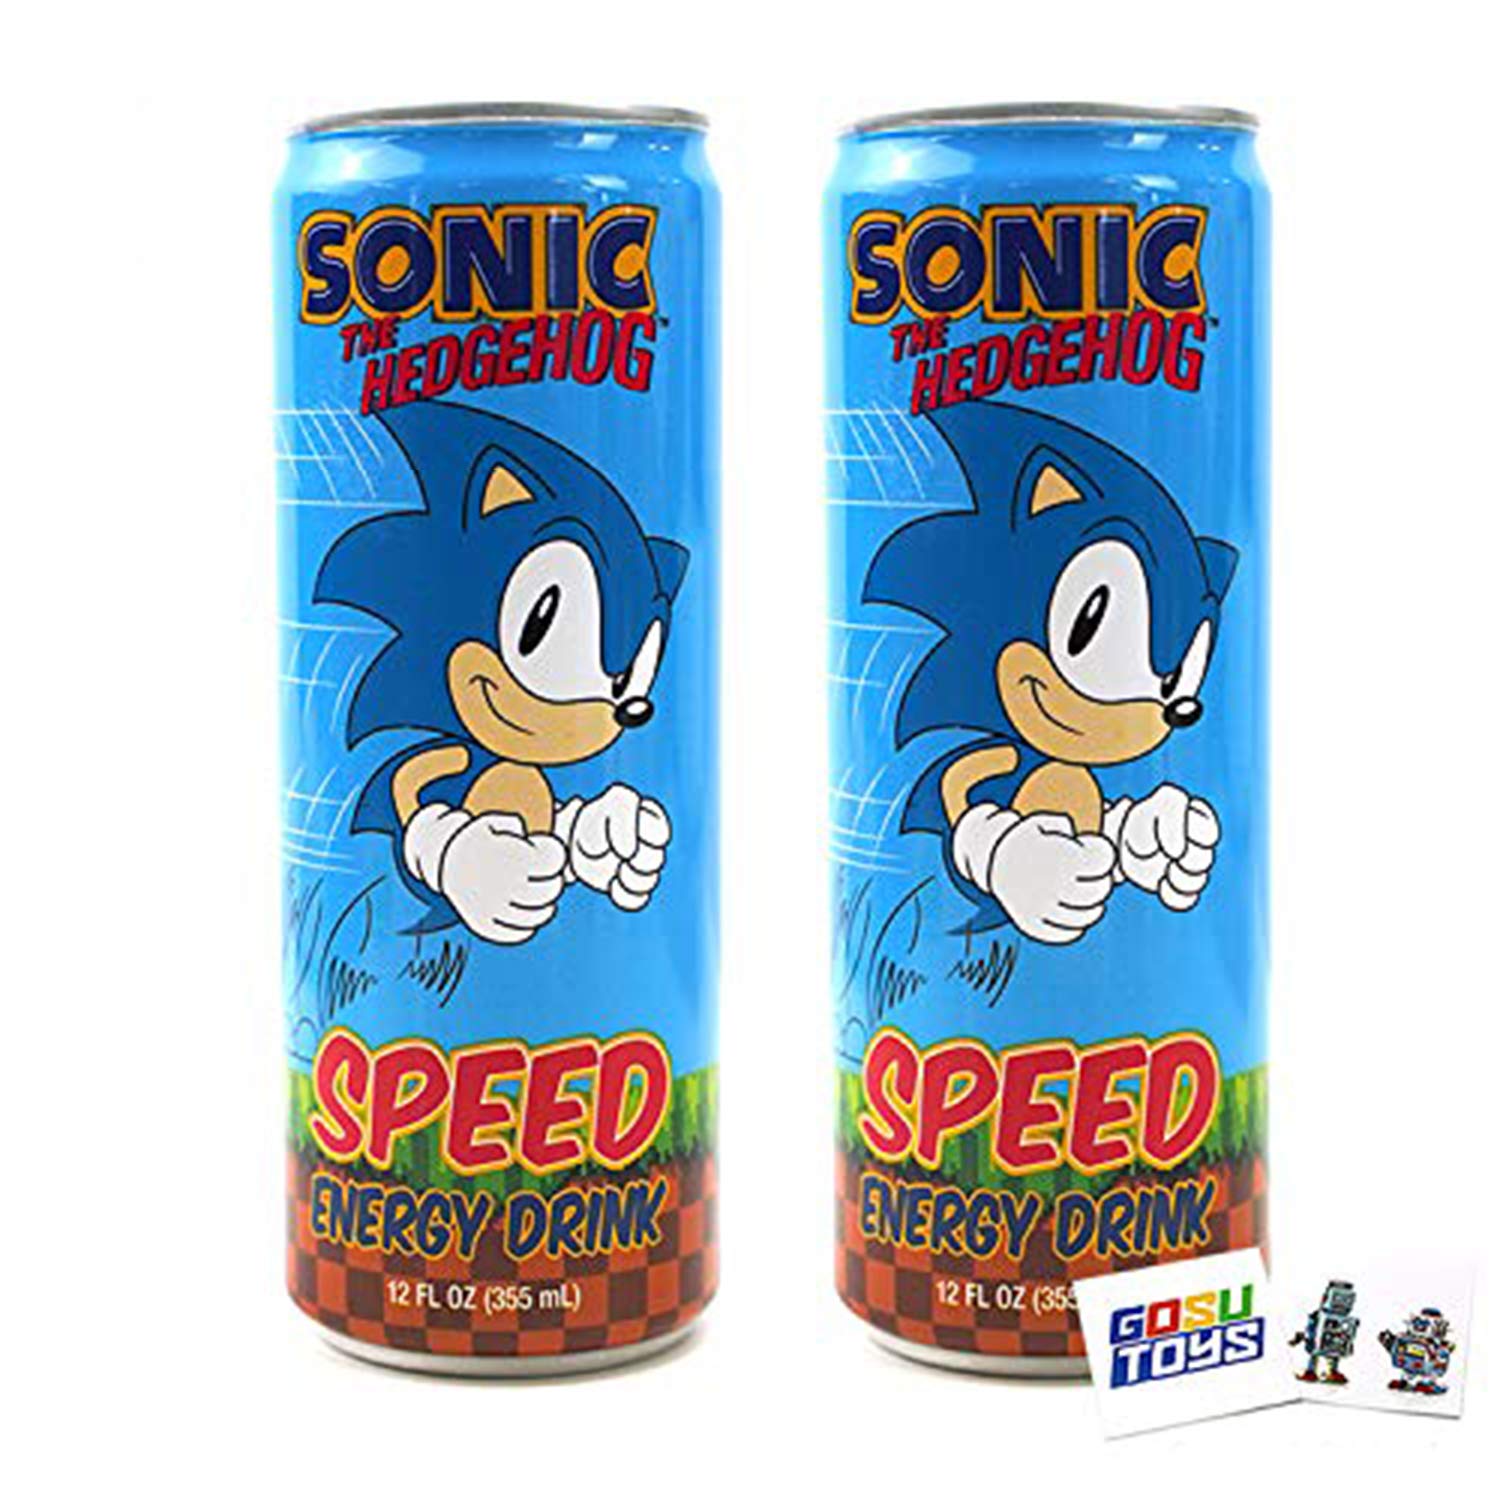 Sonic Speed Energy Drink 12 FL OZ (355mL) Can (2 Pack) With 2 GosuToys Stickers